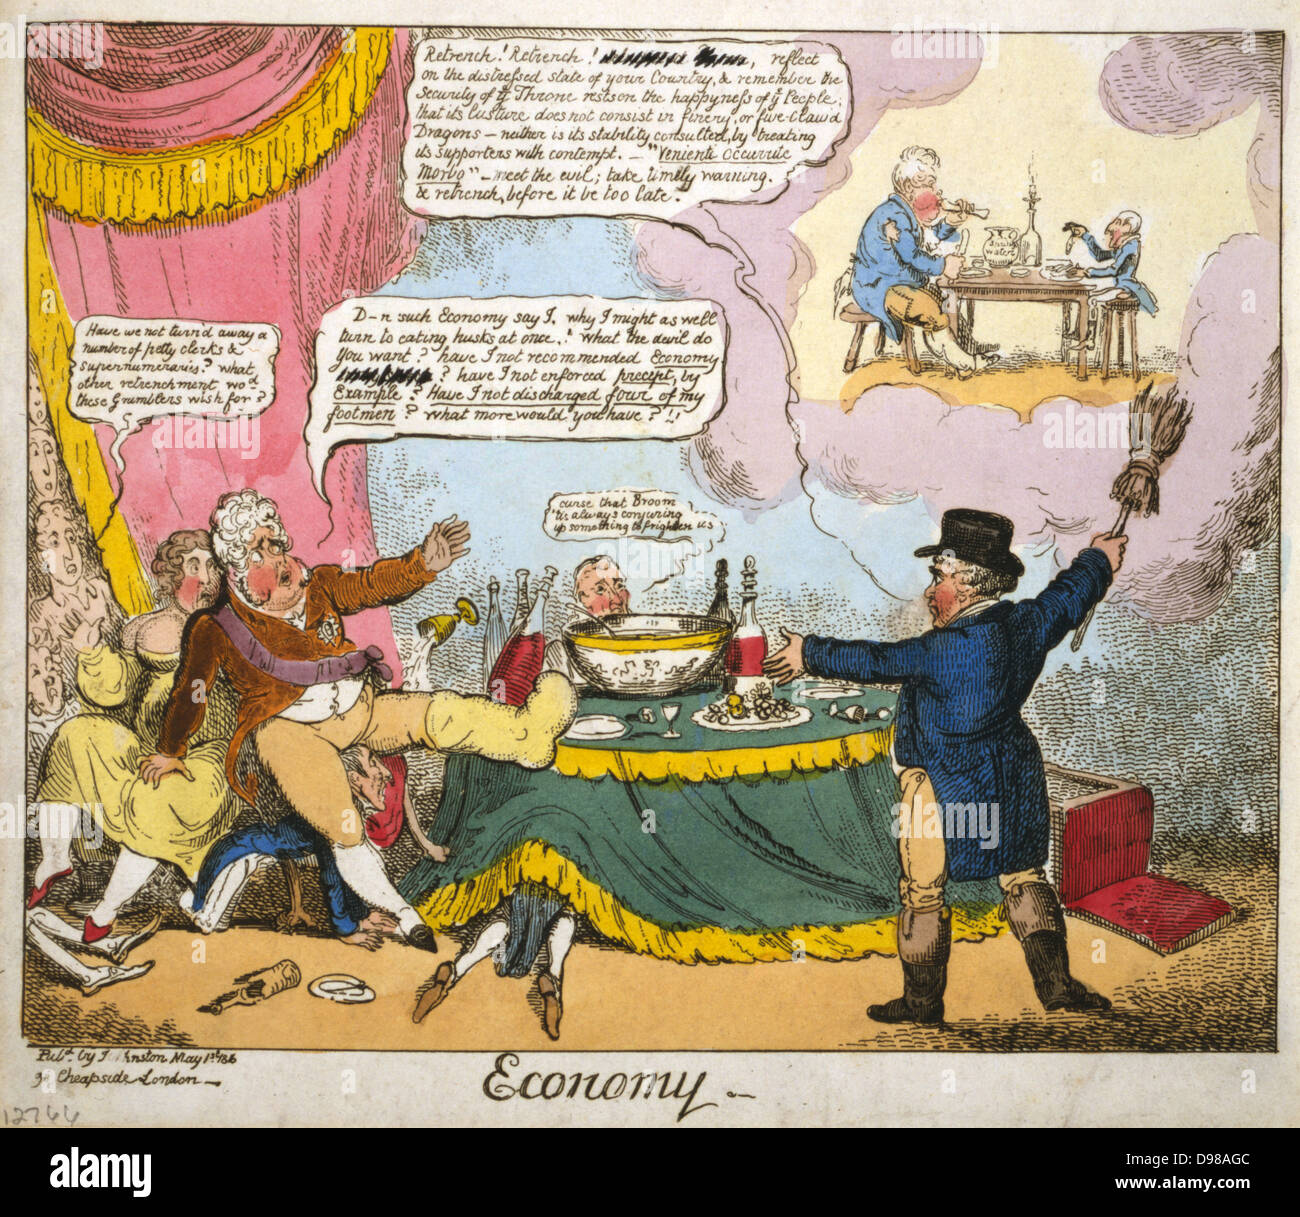 Economy': Lord Brougham as John Bull, calling on the Prince Regent (later George IV) to retrench and curb his extravagance and to think of the people. Unless he does he will end up in rags (vision at top right). Sitting next to the Regent is his mistress, Lady Hertford. Cartoon by George Cruikshank, London 1816. Stock Photo